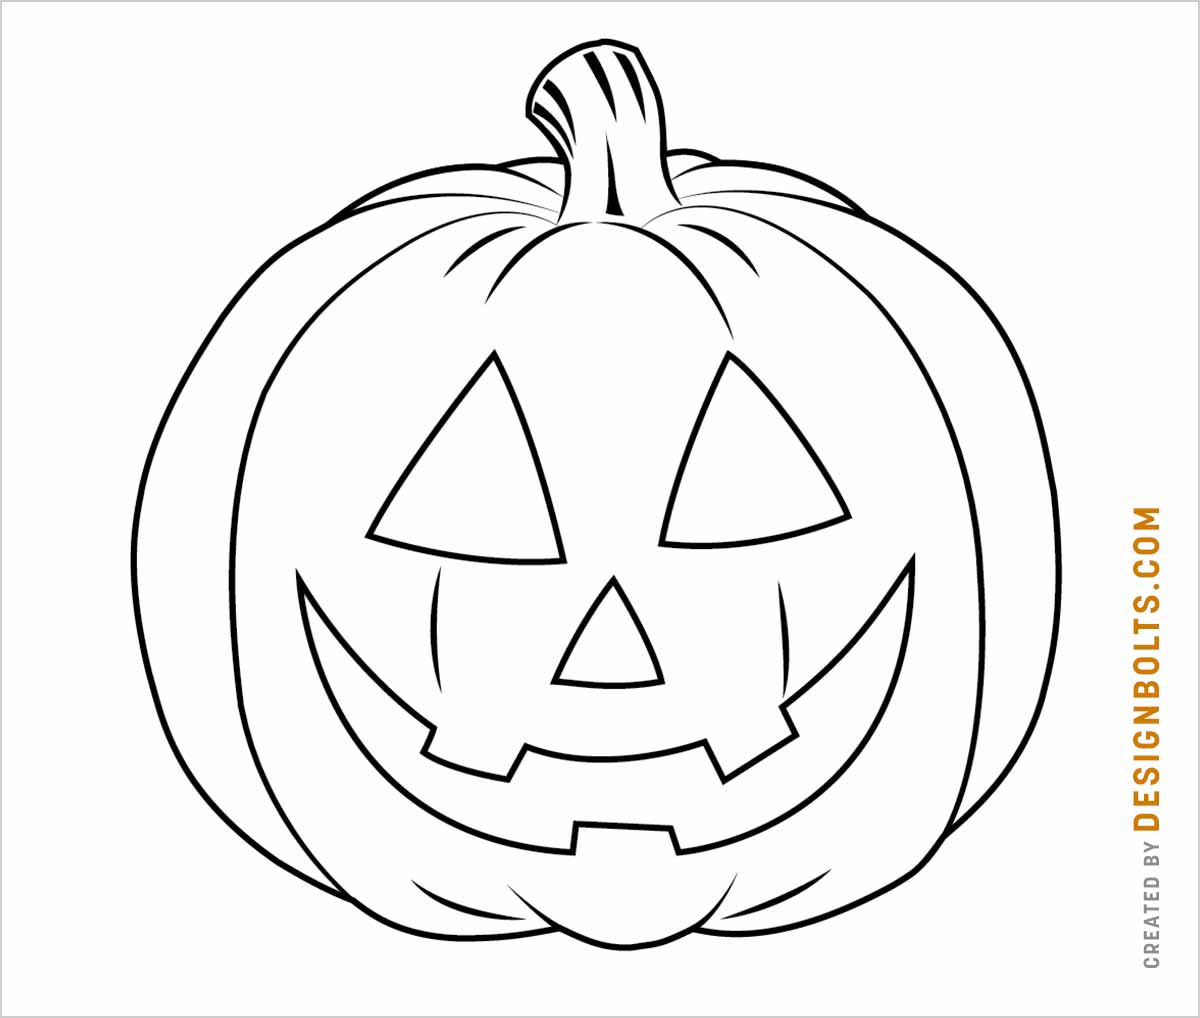 Pumpkin Template | Free Printable Pumpkin Outlines - One Little Project